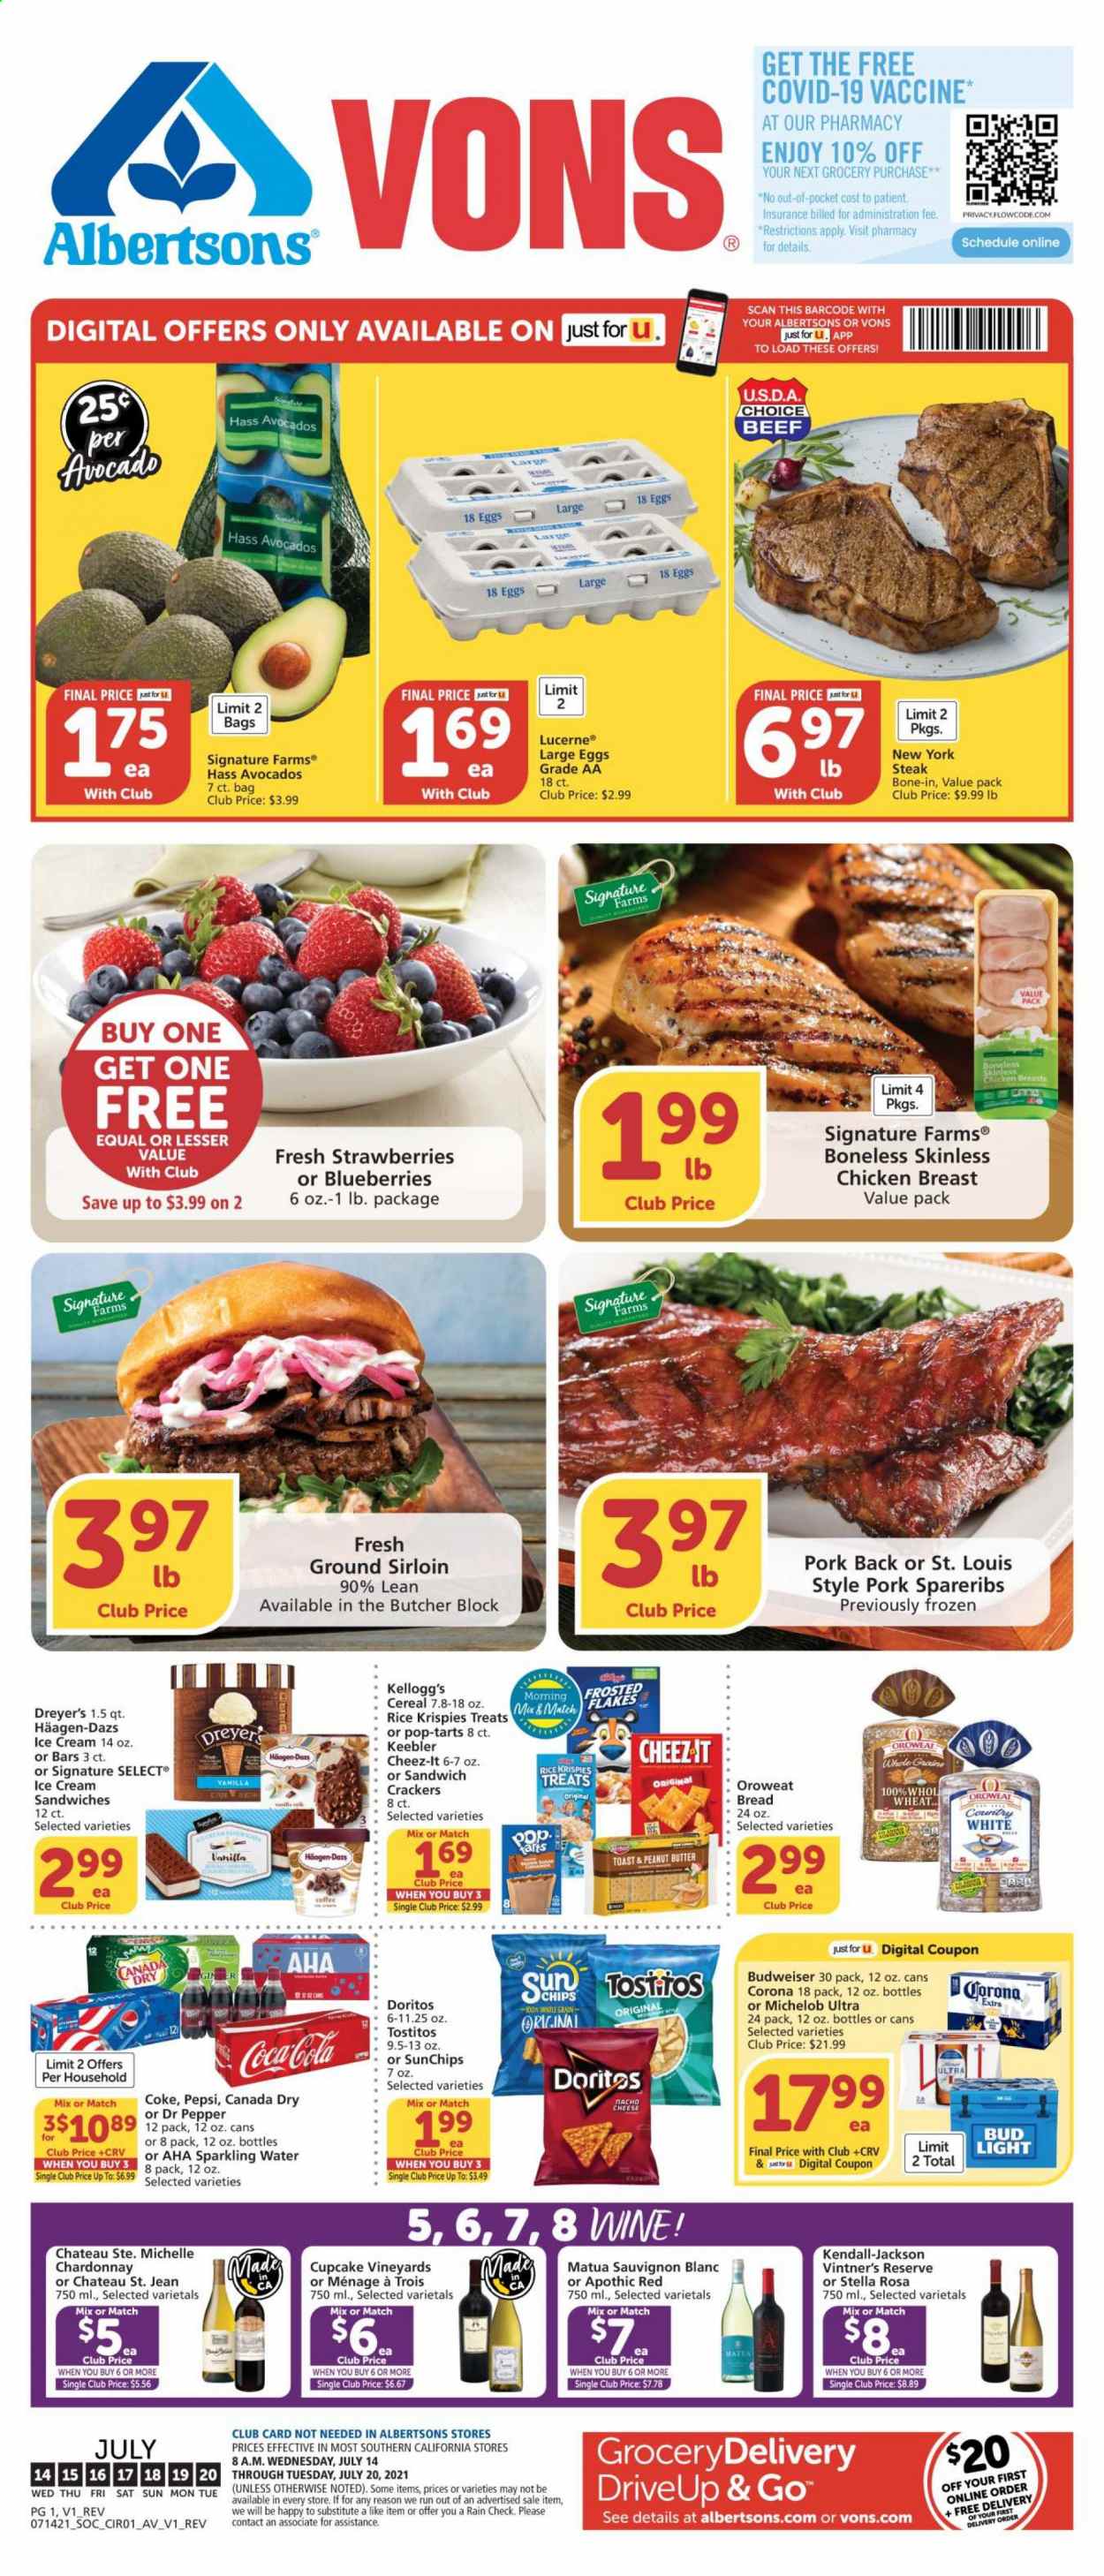 thumbnail - Albertsons Flyer - 07/14/2021 - 07/20/2021 - Sales products - Budweiser, Michelob, bread, avocado, blueberries, strawberries, cheese, large eggs, ice cream, ice cream sandwich, Häagen-Dazs, crackers, Kellogg's, Pop-Tarts, Keebler, Doritos, Cheez-It, Tostitos, cereals, Rice Krispies, peanut butter, Canada Dry, Coca-Cola, Pepsi, Dr. Pepper, sparkling water, coffee, white wine, Chardonnay, wine, Sauvignon Blanc, Cupcake Vineyards, gin, beer, Bud Light, Corona Extra, chicken breasts, steak, pork spare ribs. Page 1.